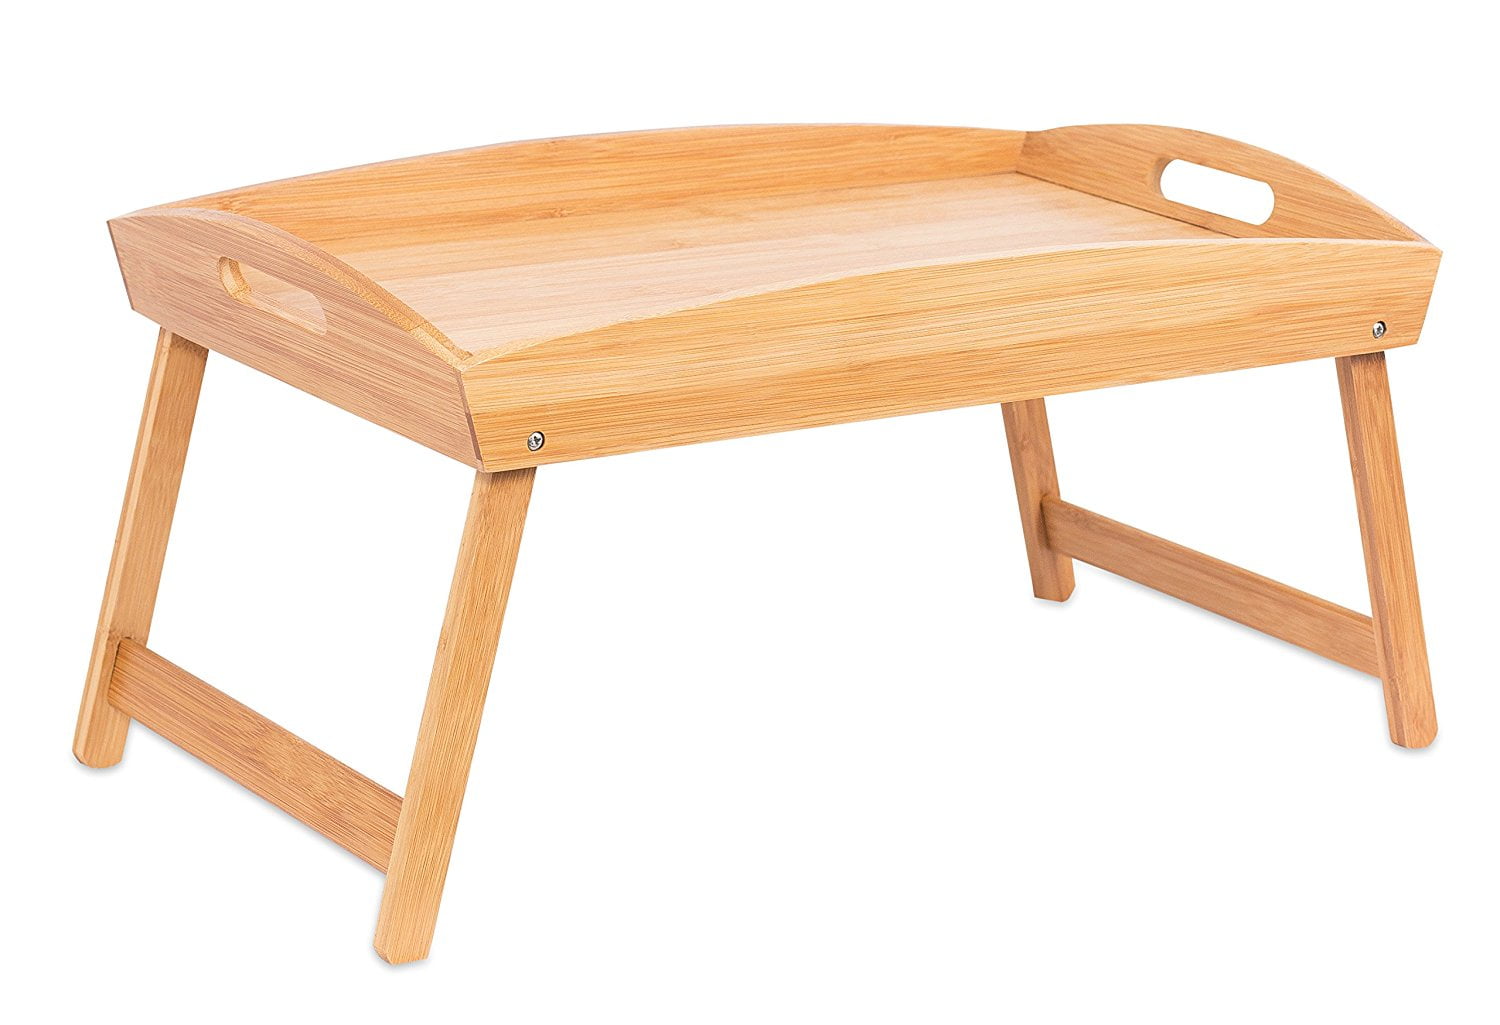 Details about   Home Basics Pine Bed Tray with Folding Legs Eat In Easy Access Food Work Table 